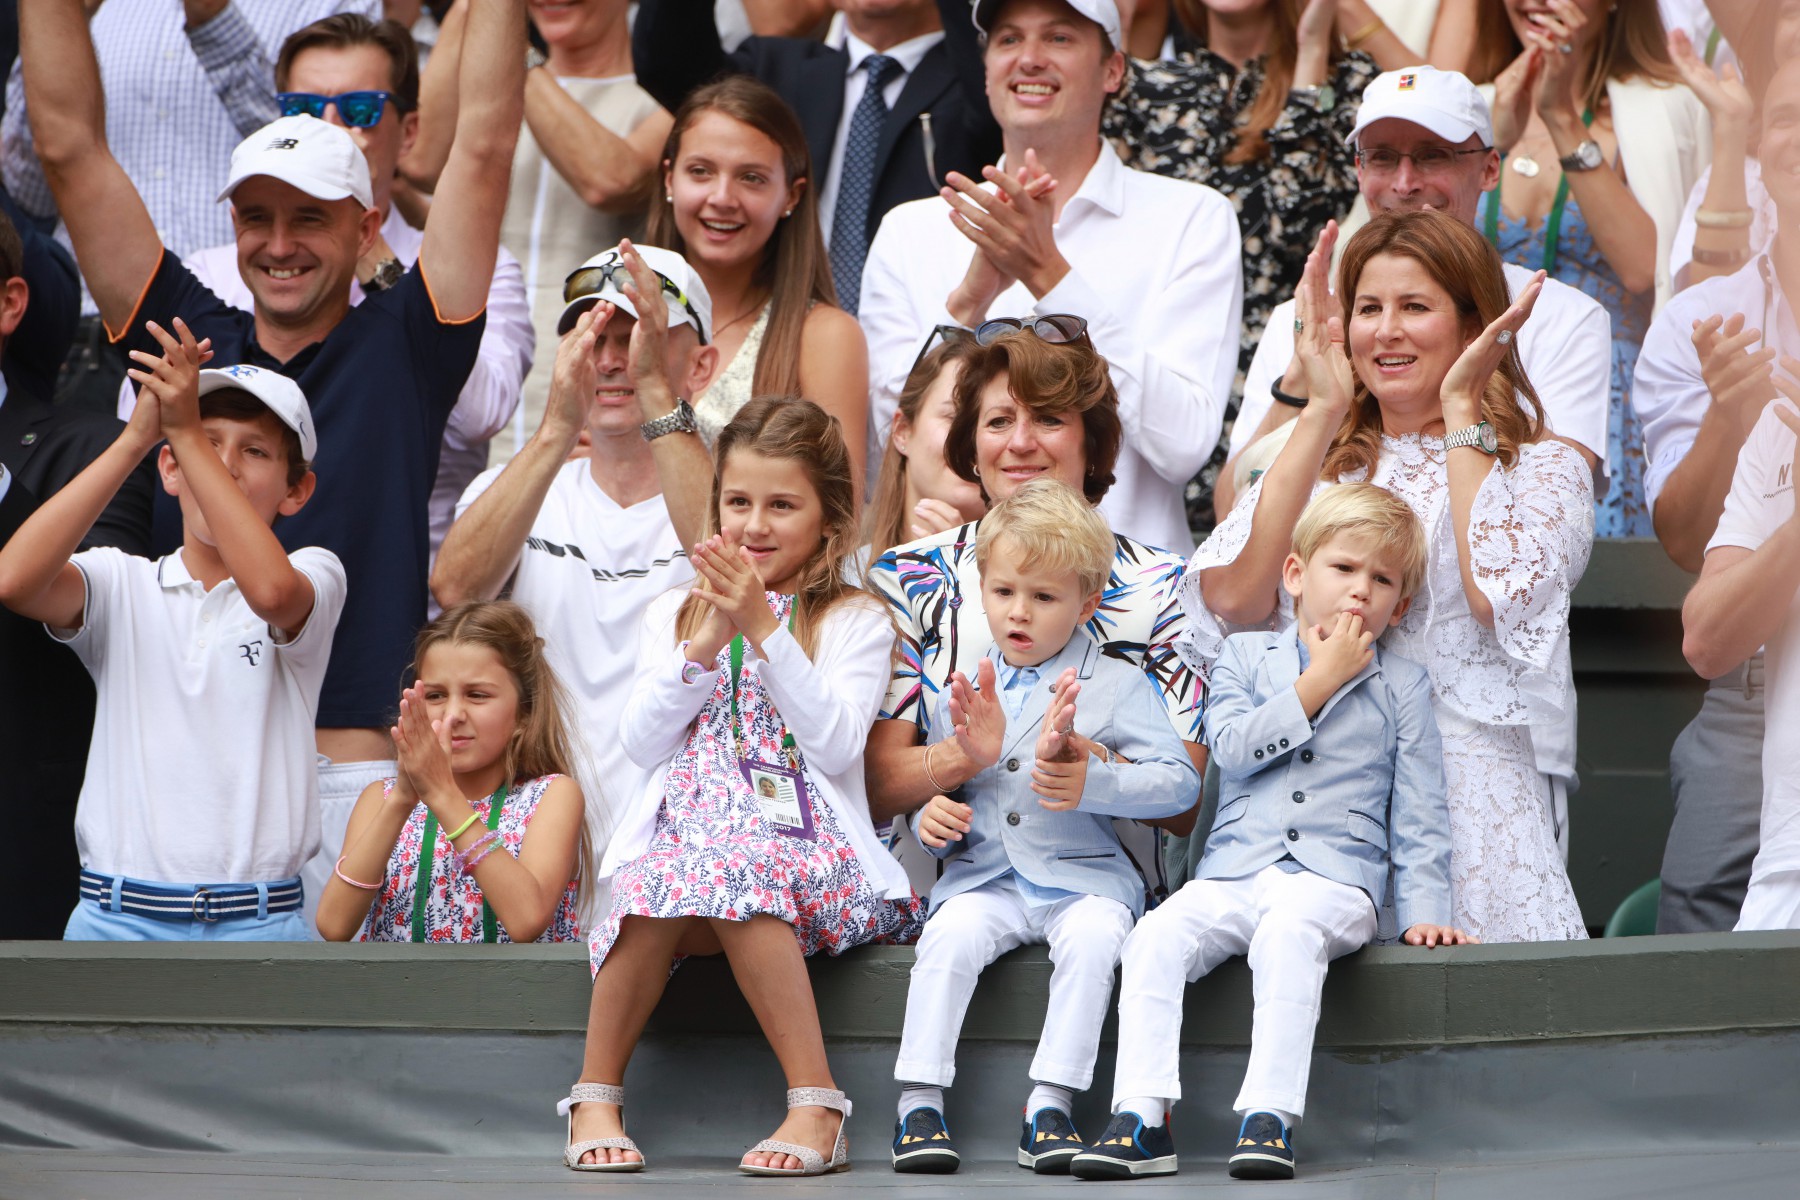 Mirka is frequently in her husband's box during matches to support him while also raising their four young children